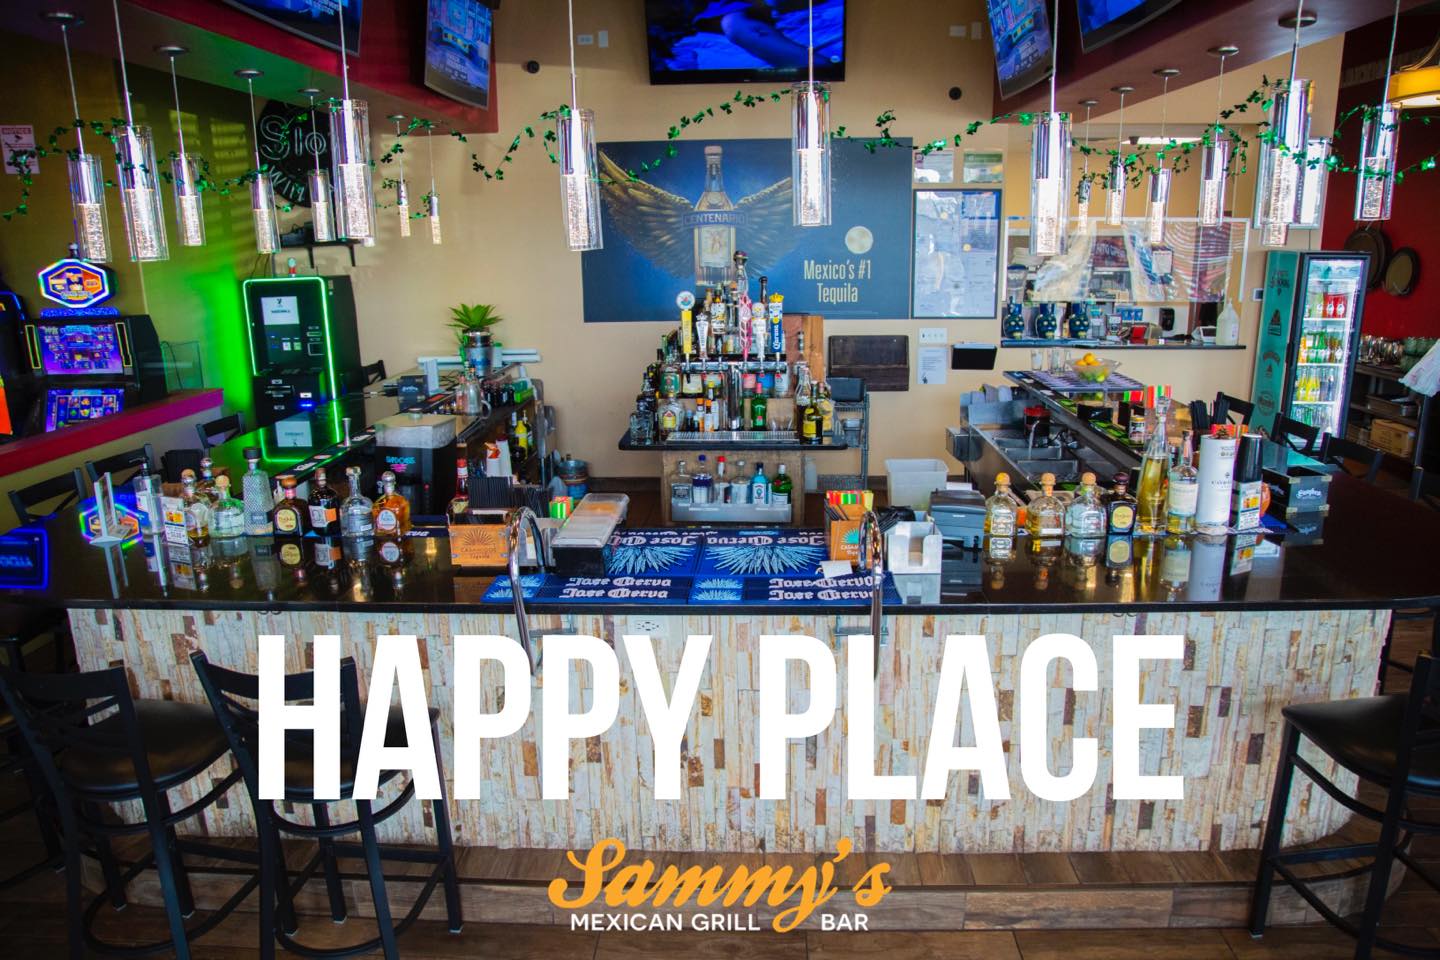 Sammy's Mexican Grill and Bar